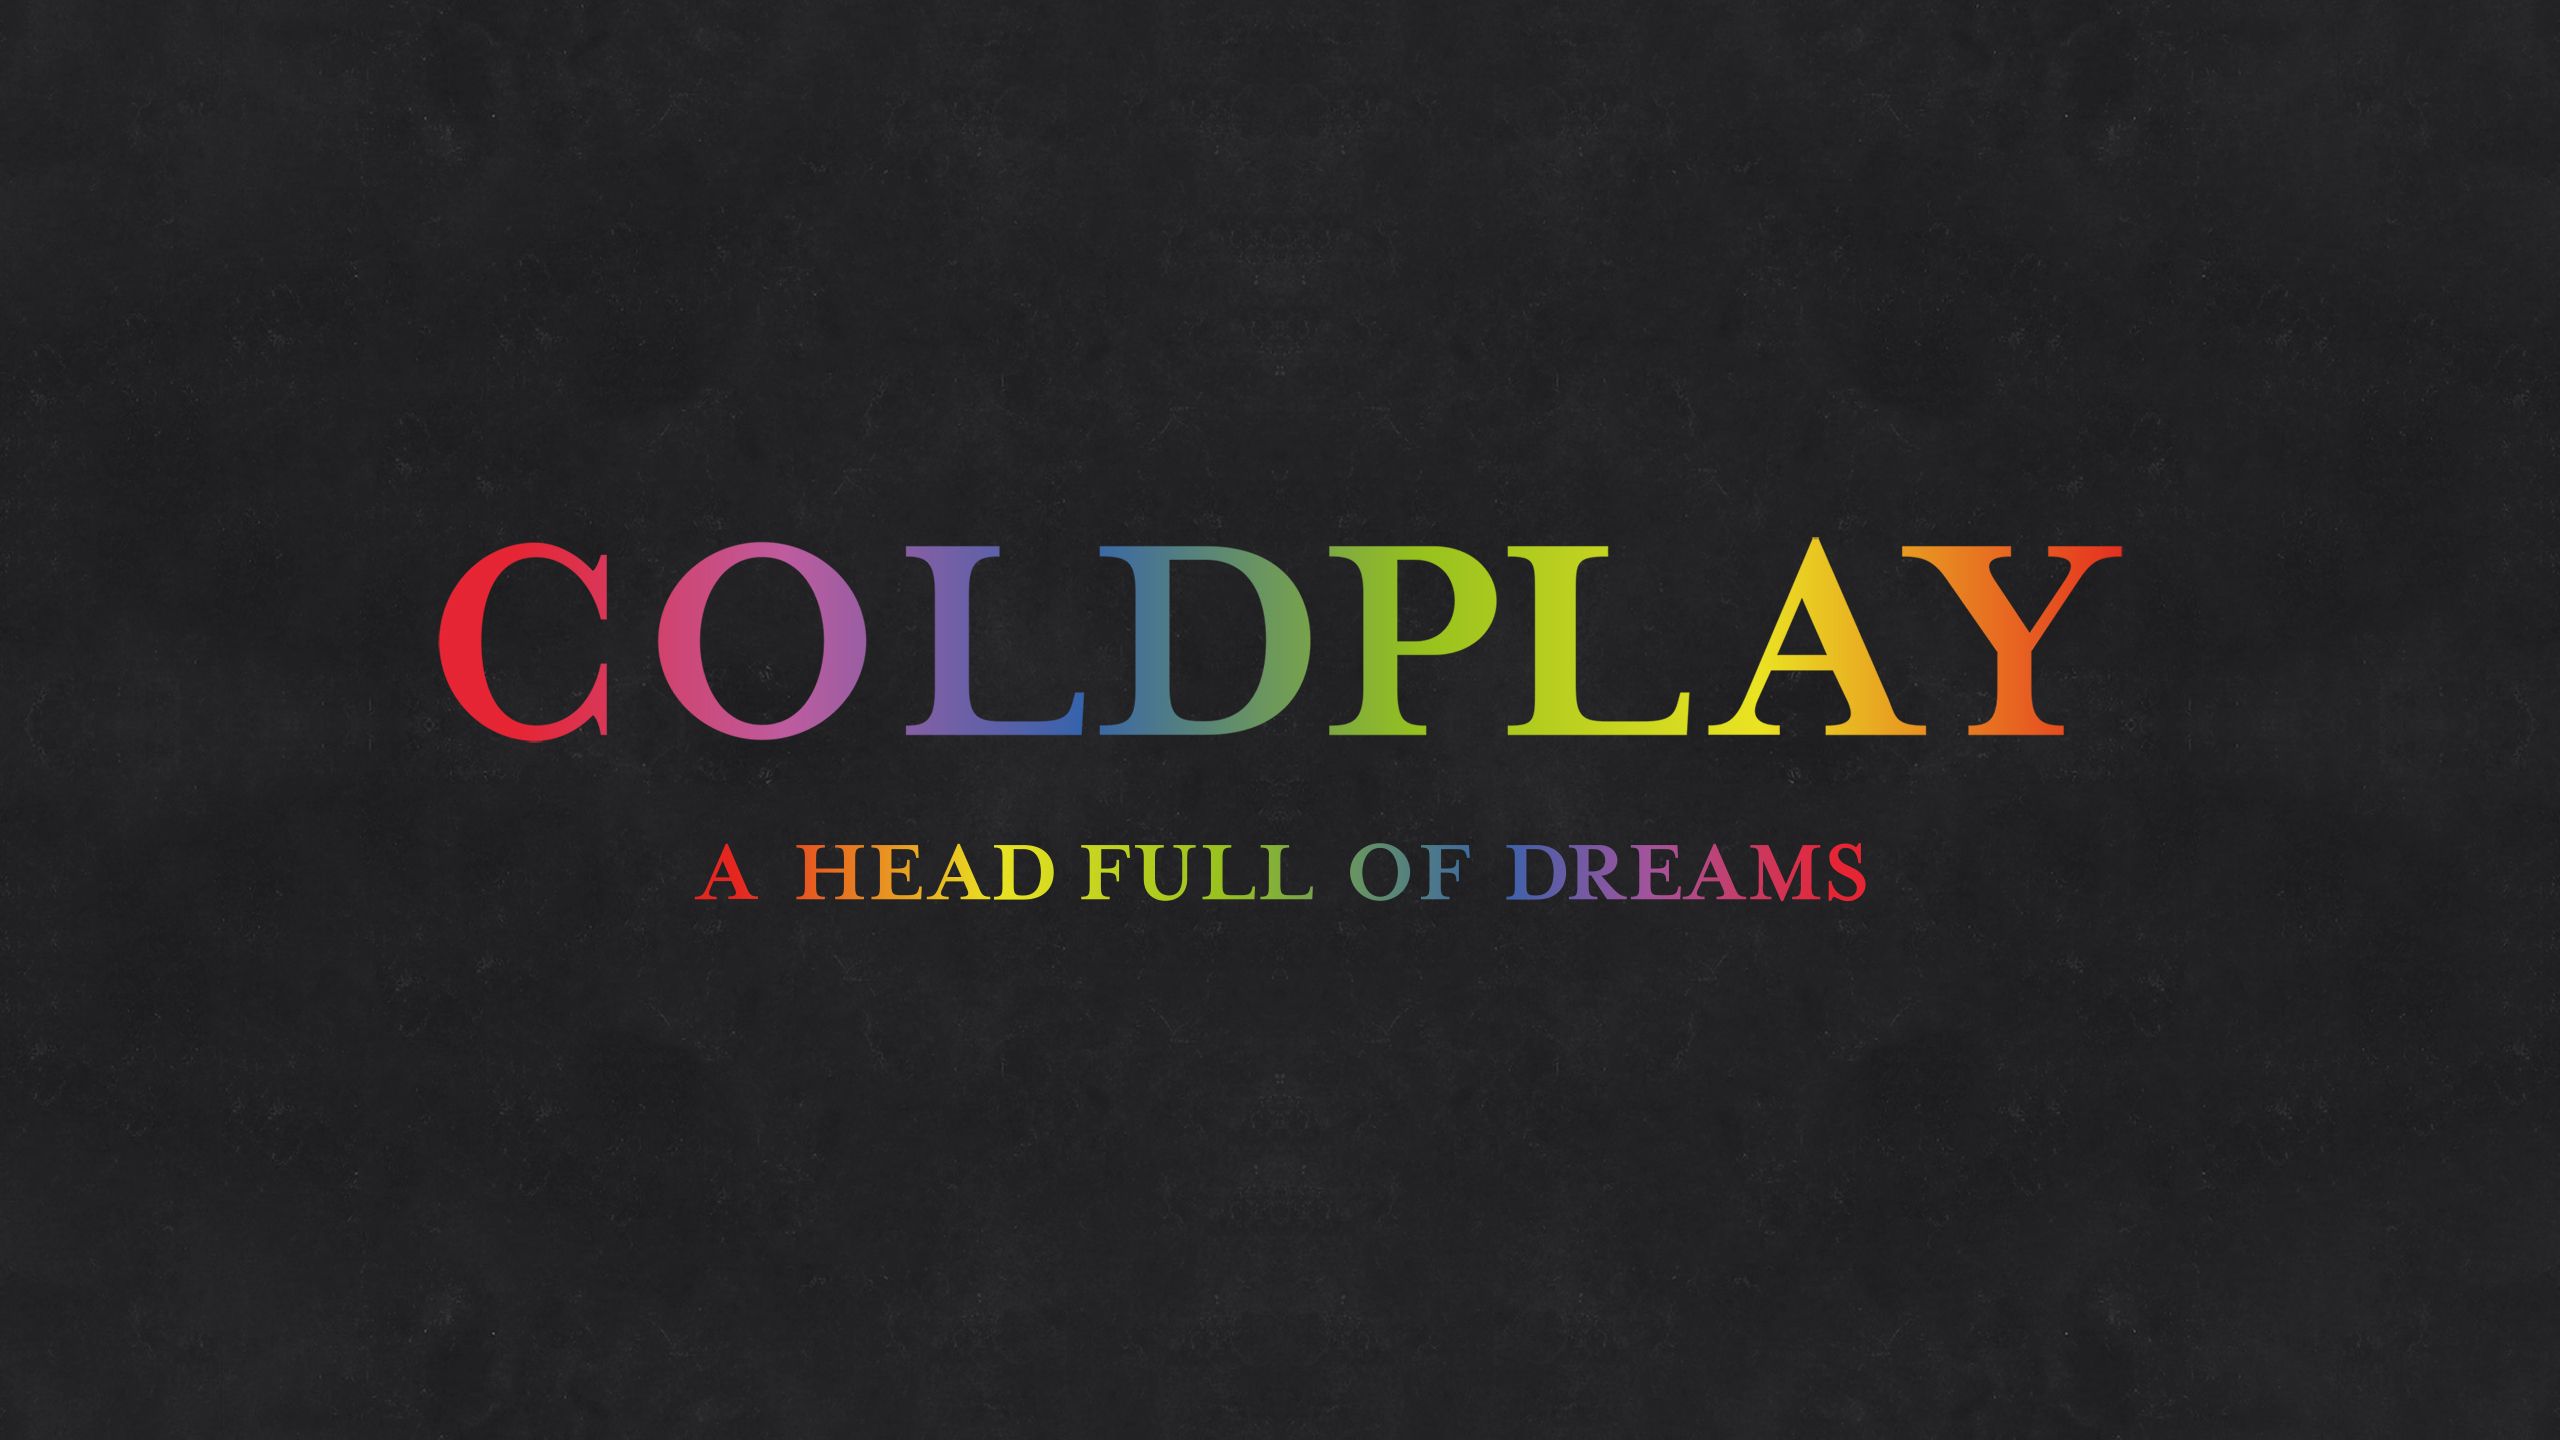 Coldplay Wallpaper HD Desktop Background Image And Pictures